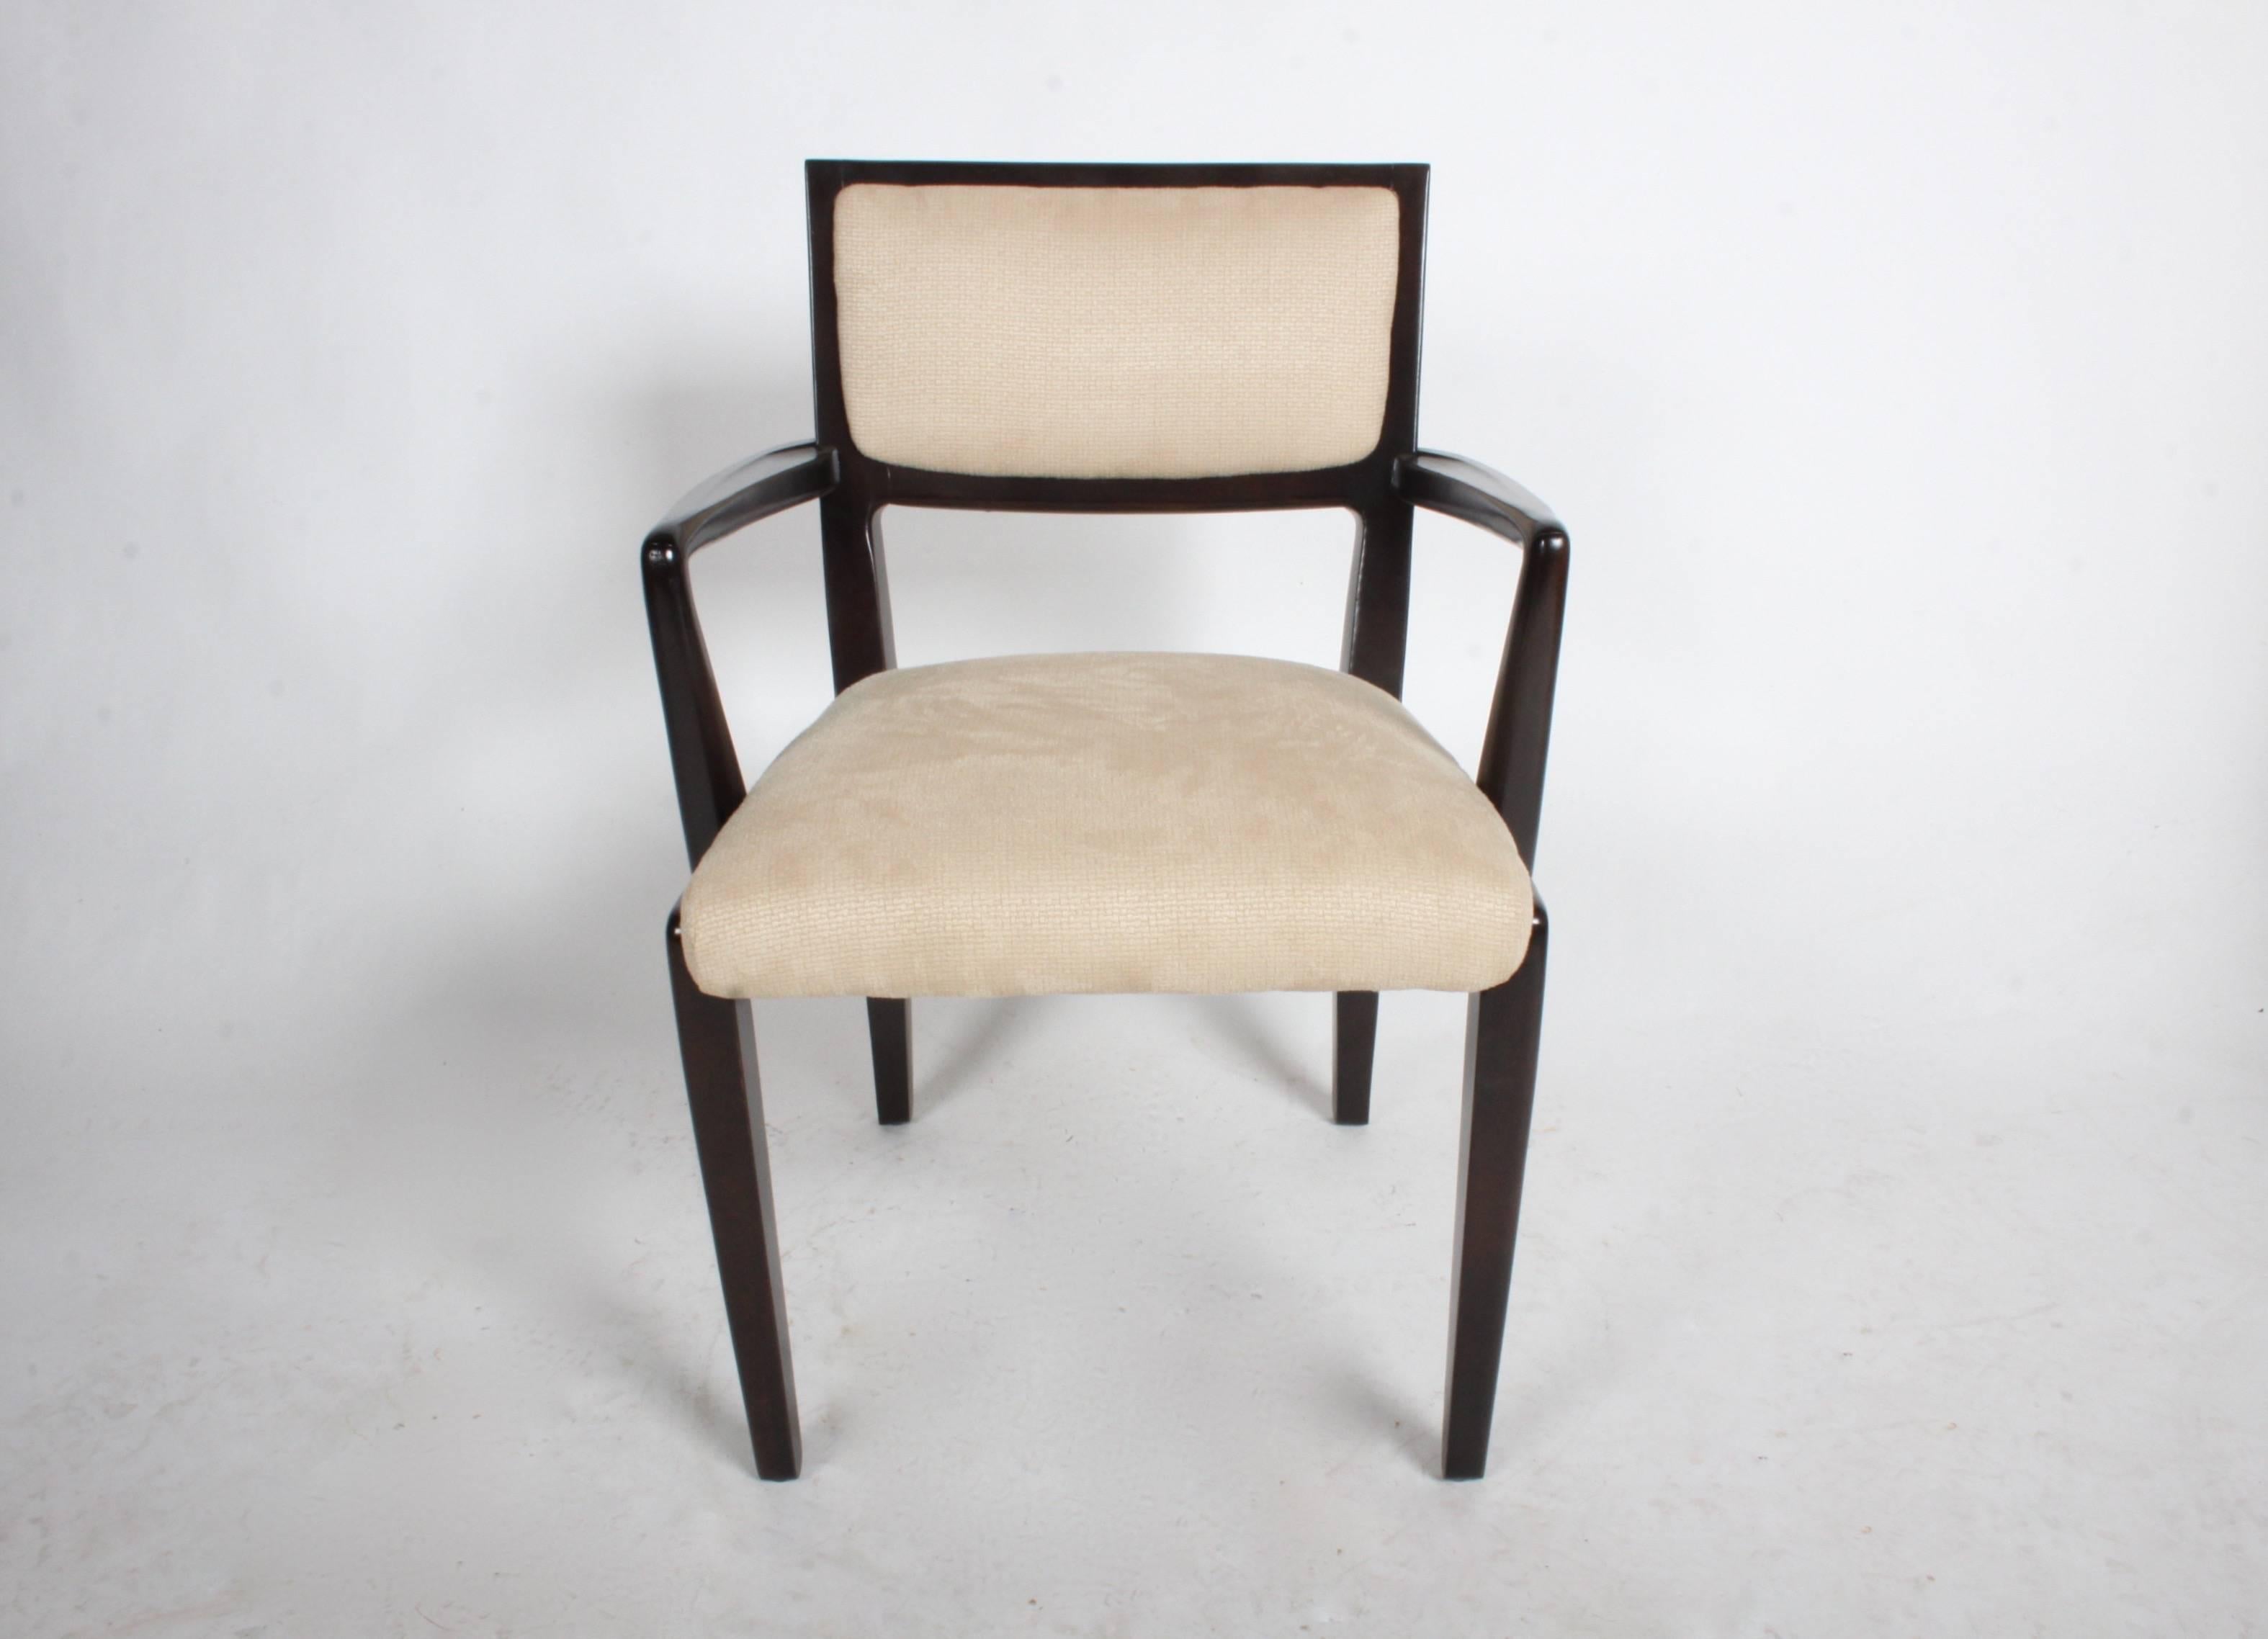 Pair of Edward Wormley for Drexel Arm Chairs - Precedent Collection  In Excellent Condition For Sale In St. Louis, MO